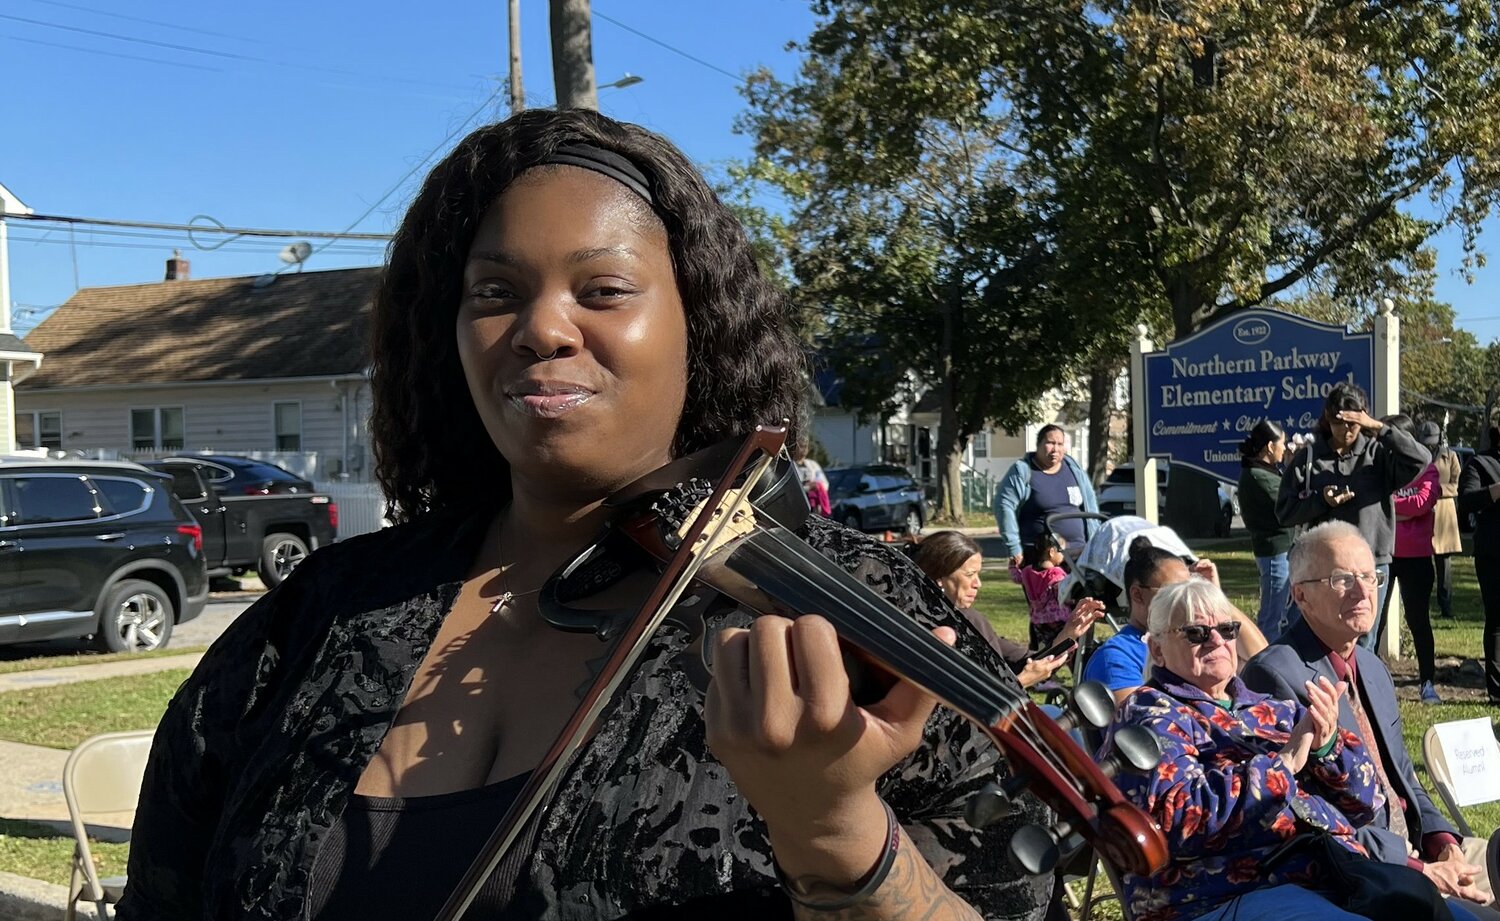 Northern Parkway School alumnus Adebisi Labinjo, whose professional name is Classique, sent sweet, wild tones from her violin out to the crowd at the school’s 100th anniversary celebration.